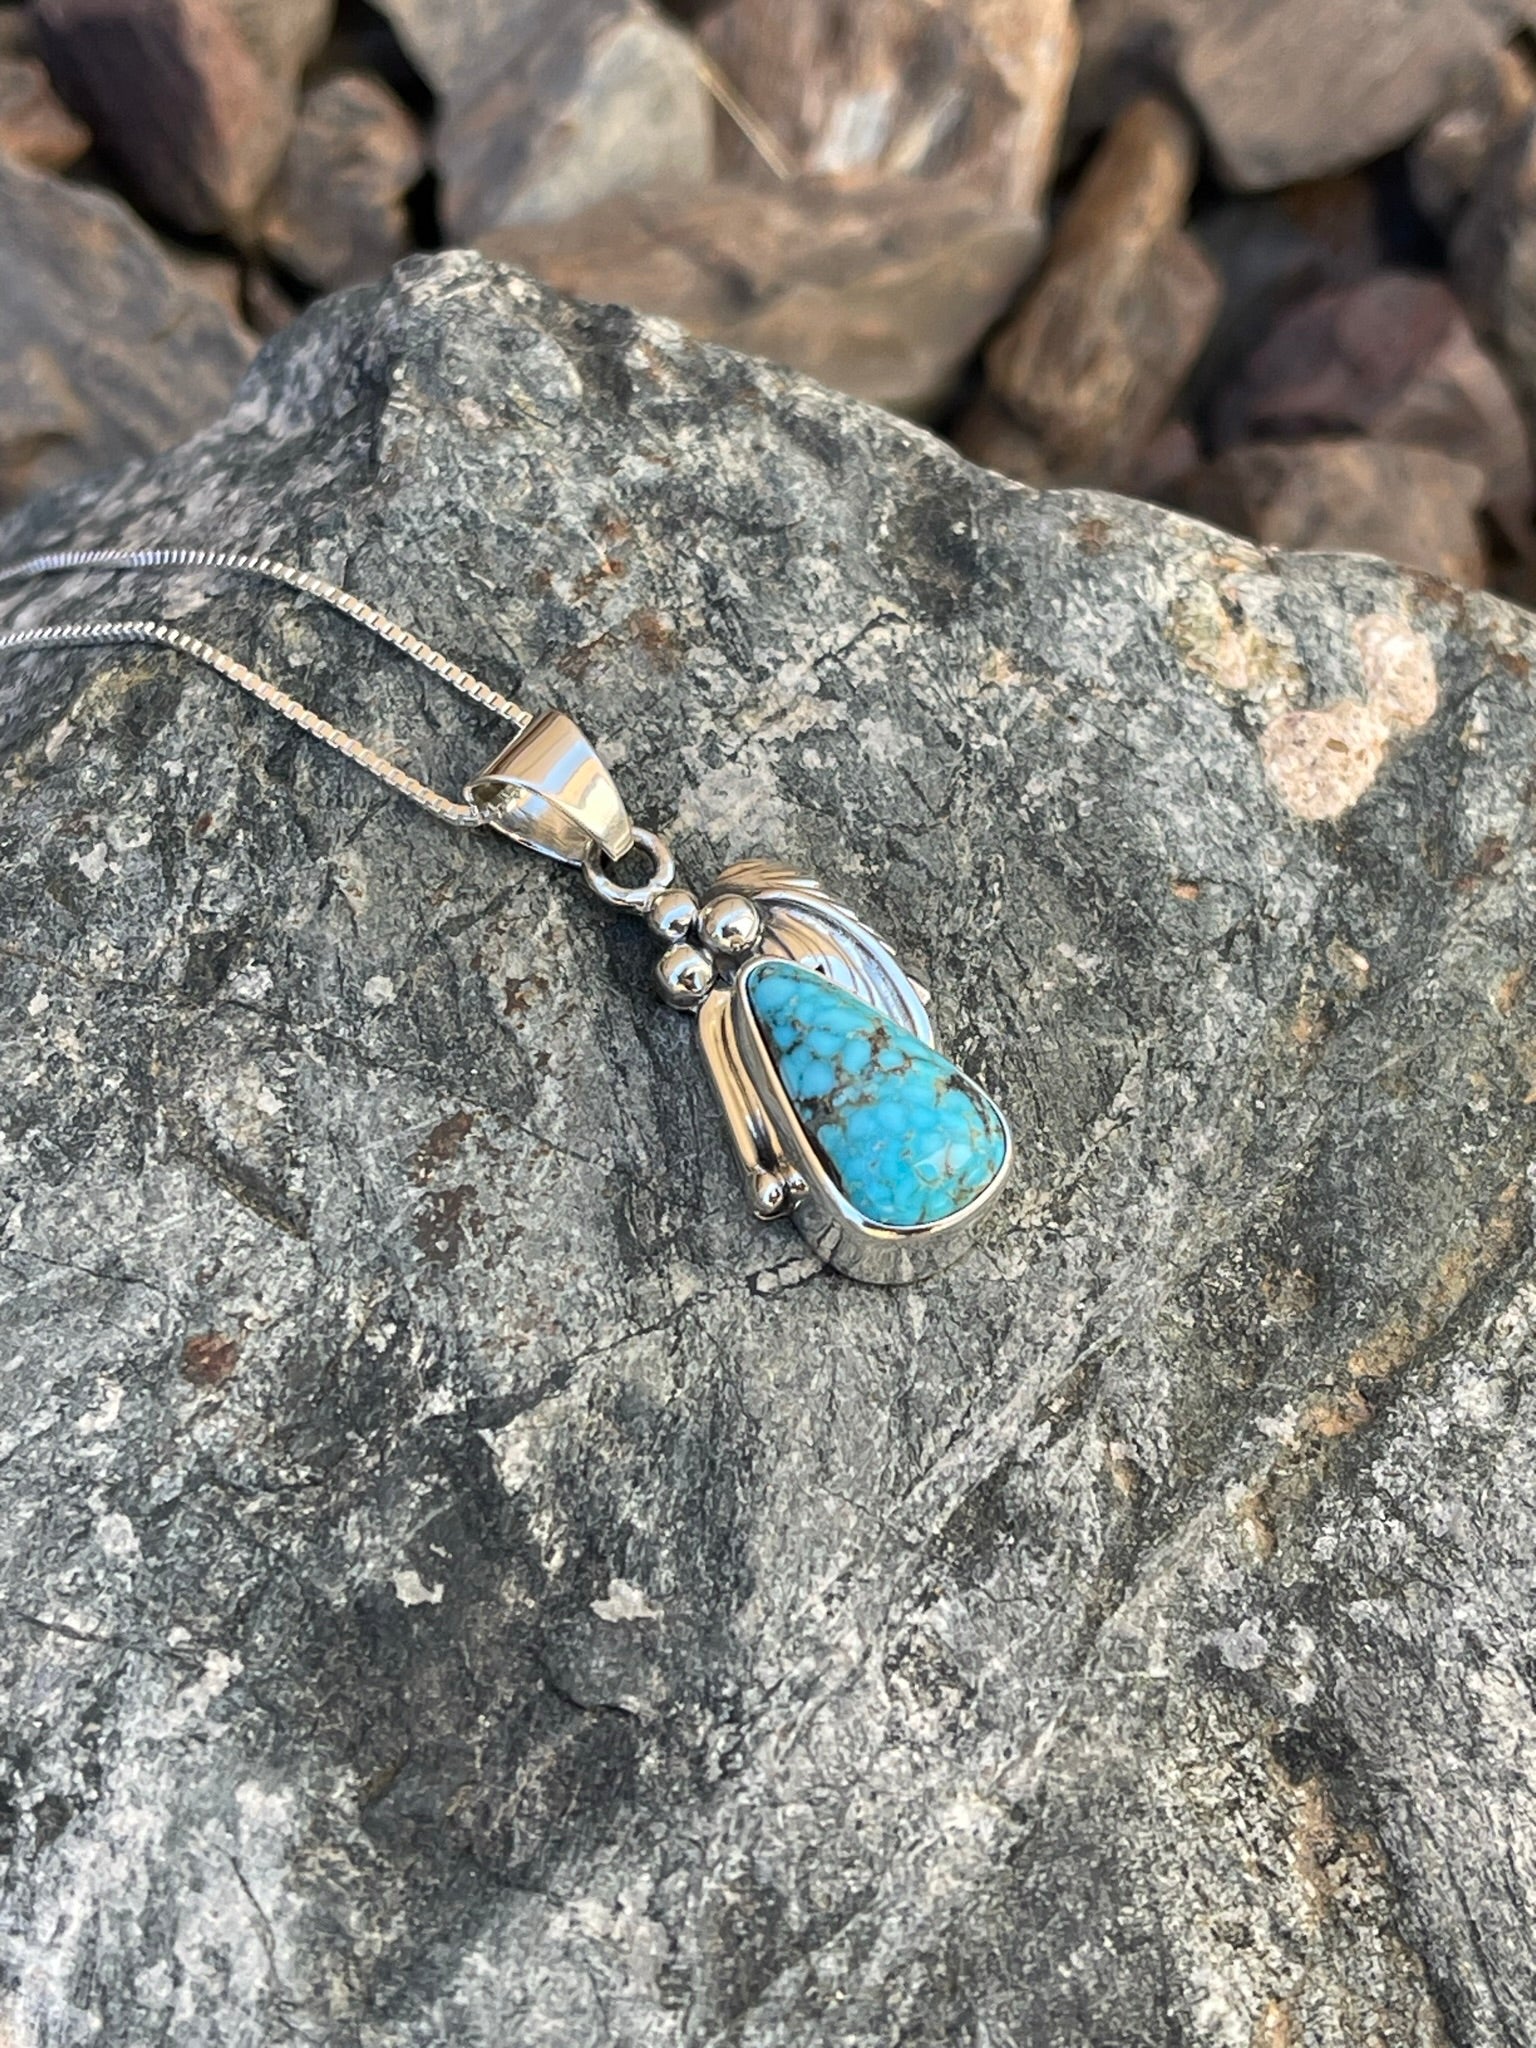 Handmade Sterling Silver Blue Kingman Turquoise Necklace with Feather Detail